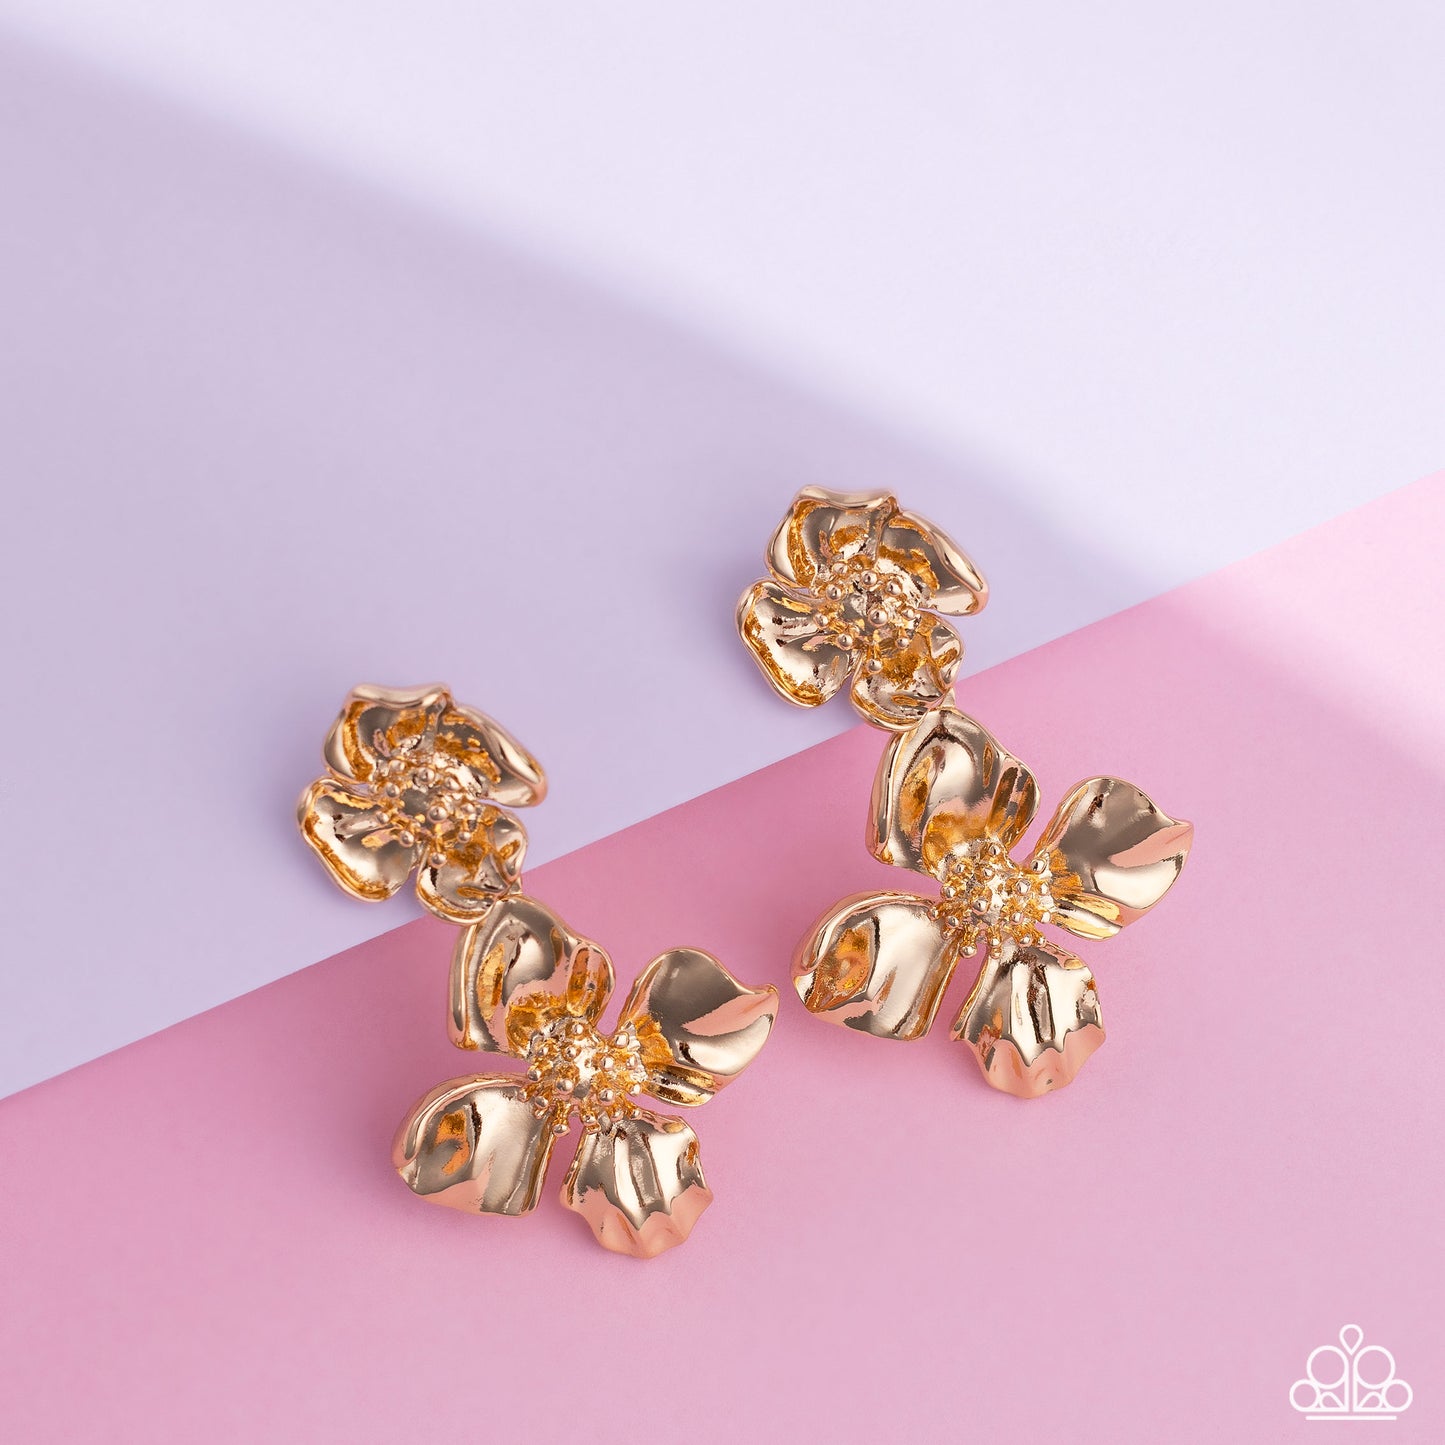 Paparazzi Accessories - Gilded Grace - Gold Earrings featuring a warped metallic texture, an oversized gold flower hangs from a smaller gold flower for a whimsical finish. Dainty gold studs coalesce the centers of each flower, adding tactile detail to the floral design. Earring attaches to a standard post fitting. Sold as one pair of post earrings.